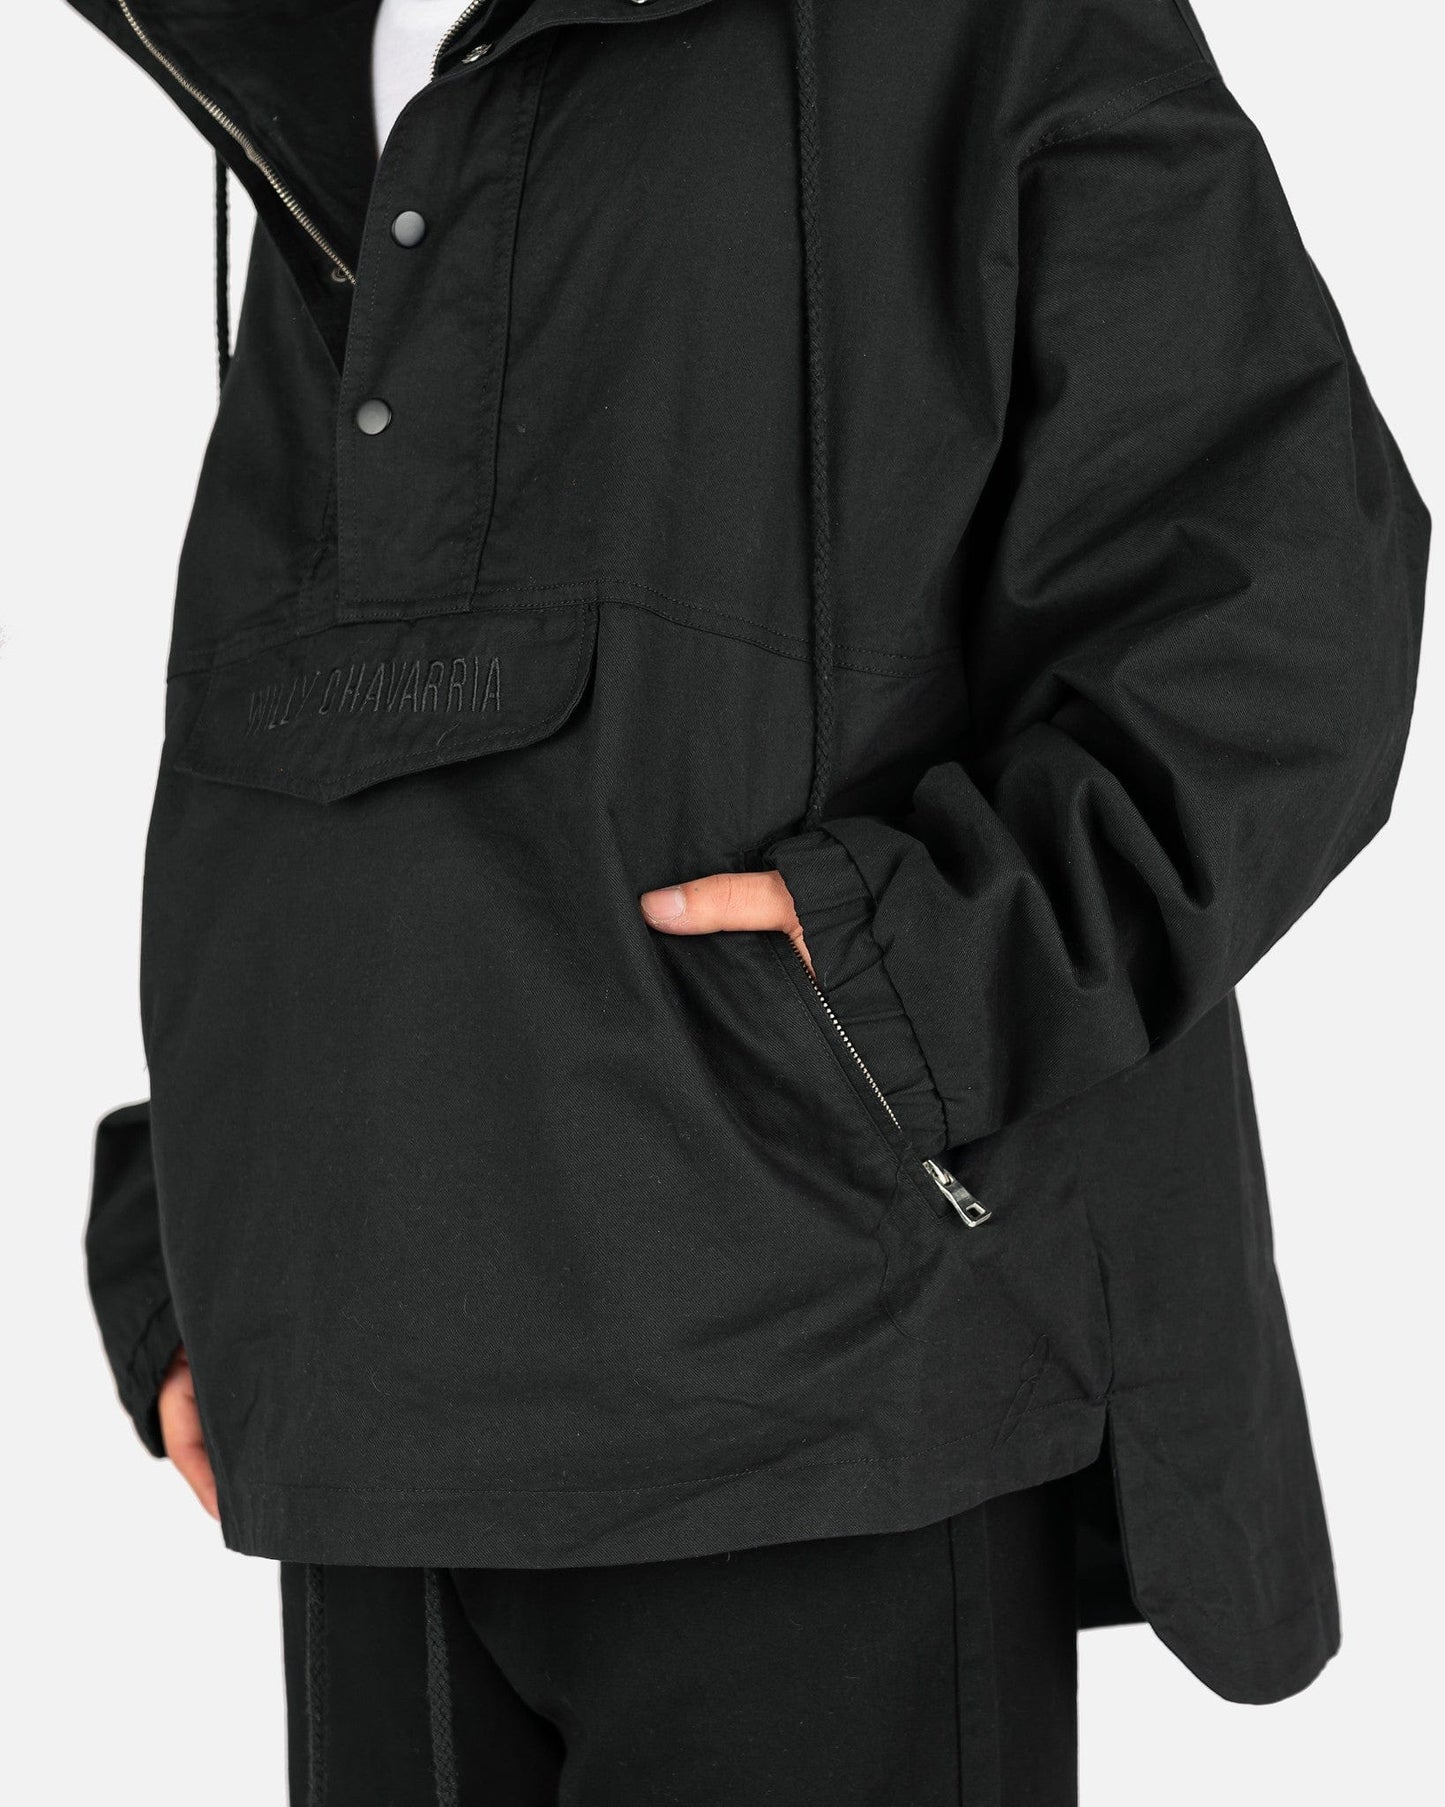 Willy Chavarria Men's Jackets Cowboy Parka in Black